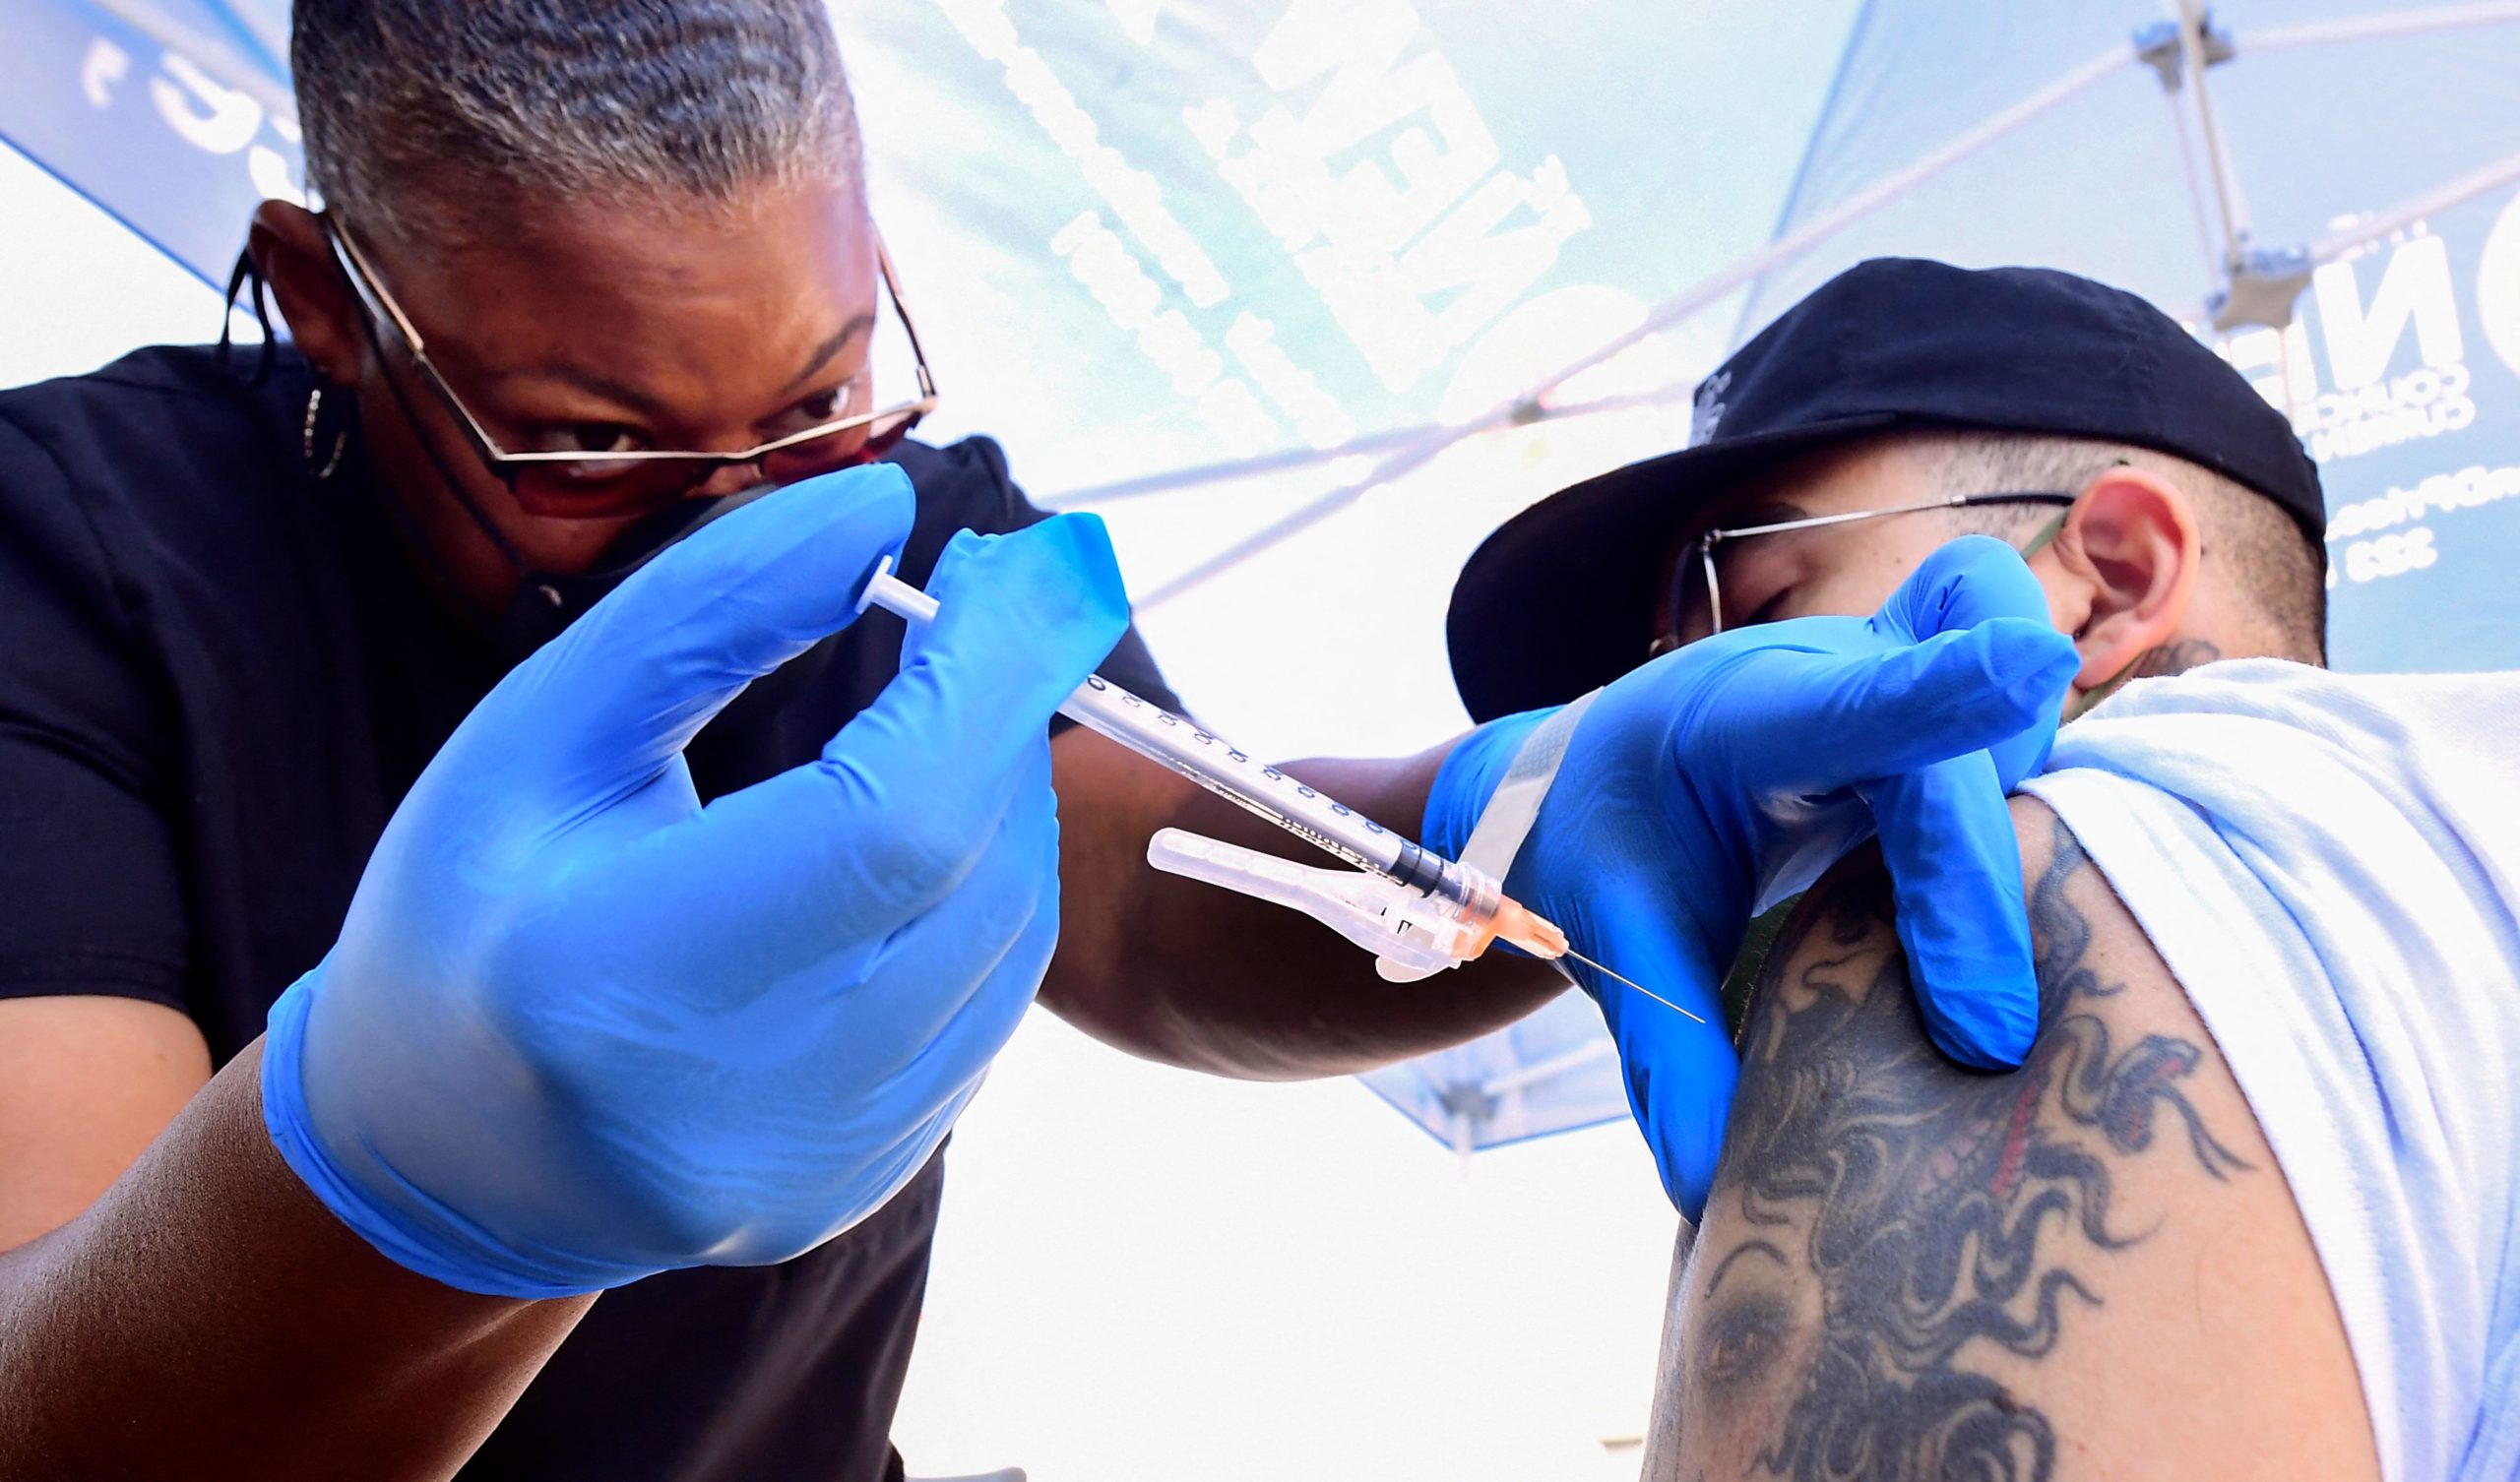 Nurse Eon Walk administers the Pfizer Covid-19 vaccine at a mobile vaccine clinic hosted by Mothers in Action and operated by the Los Angeles County of Public Health on July 16, 2021 in Los Angeles, California. (Photo by FREDERIC J. BROWN/AFP via Getty Images)